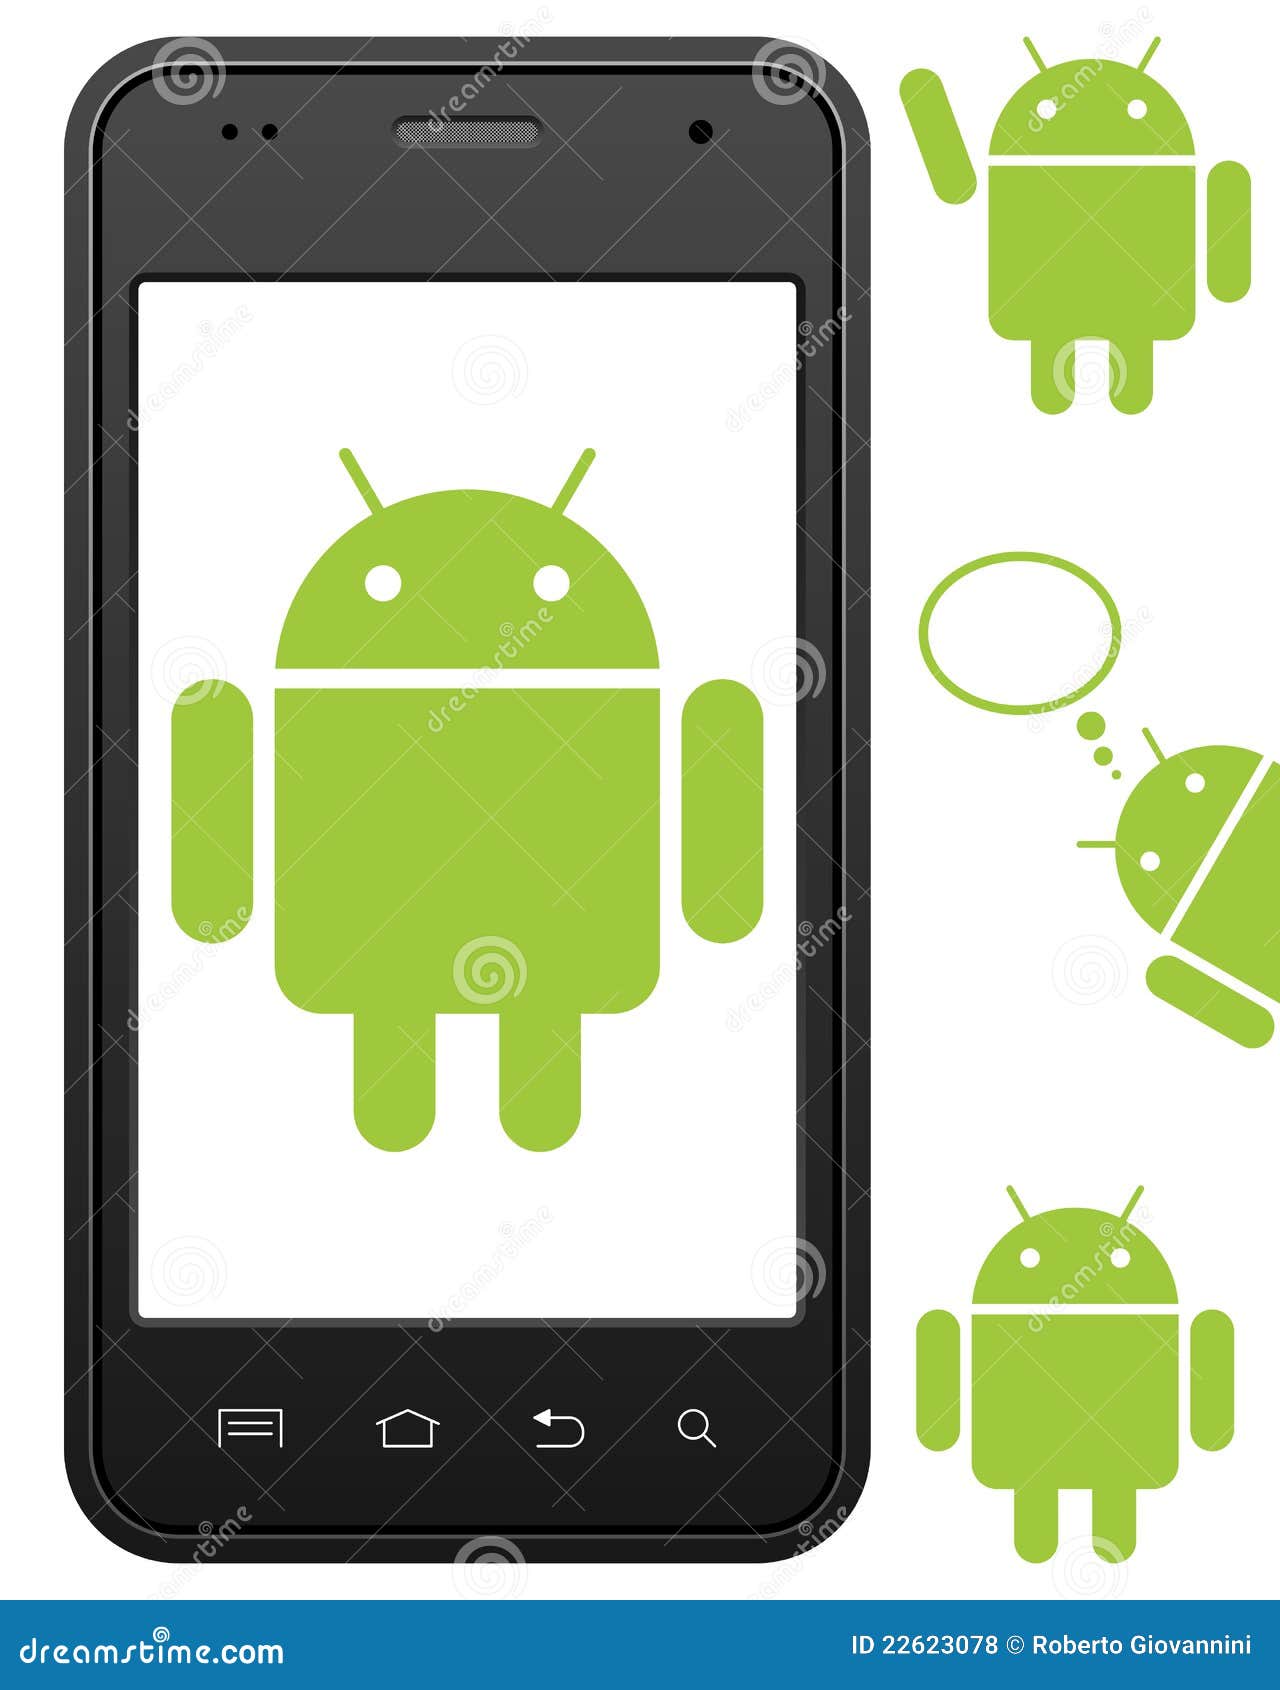 clipart for android phone - photo #21